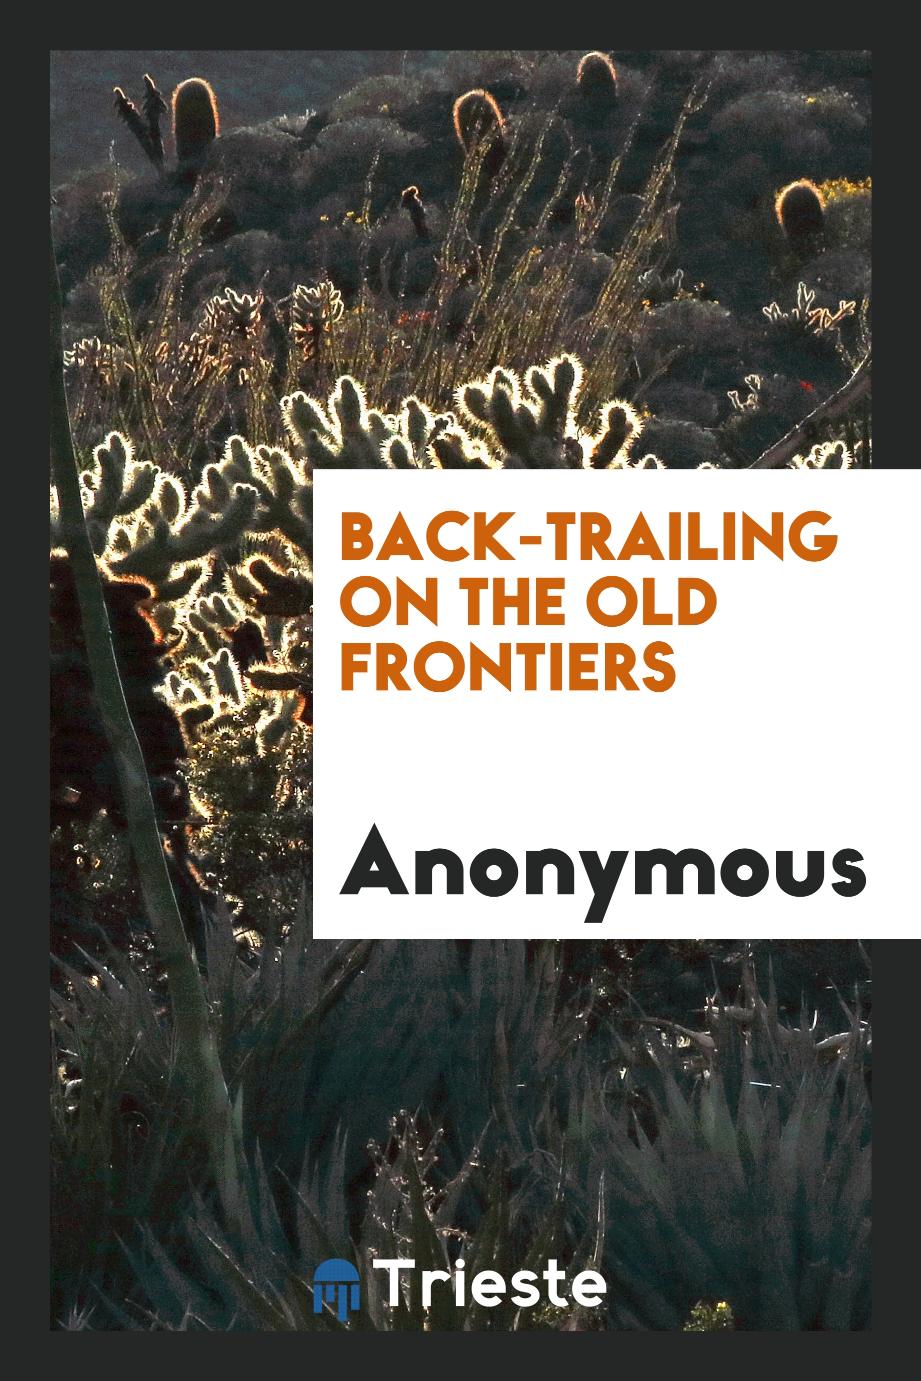 Back-trailing on the Old Frontiers